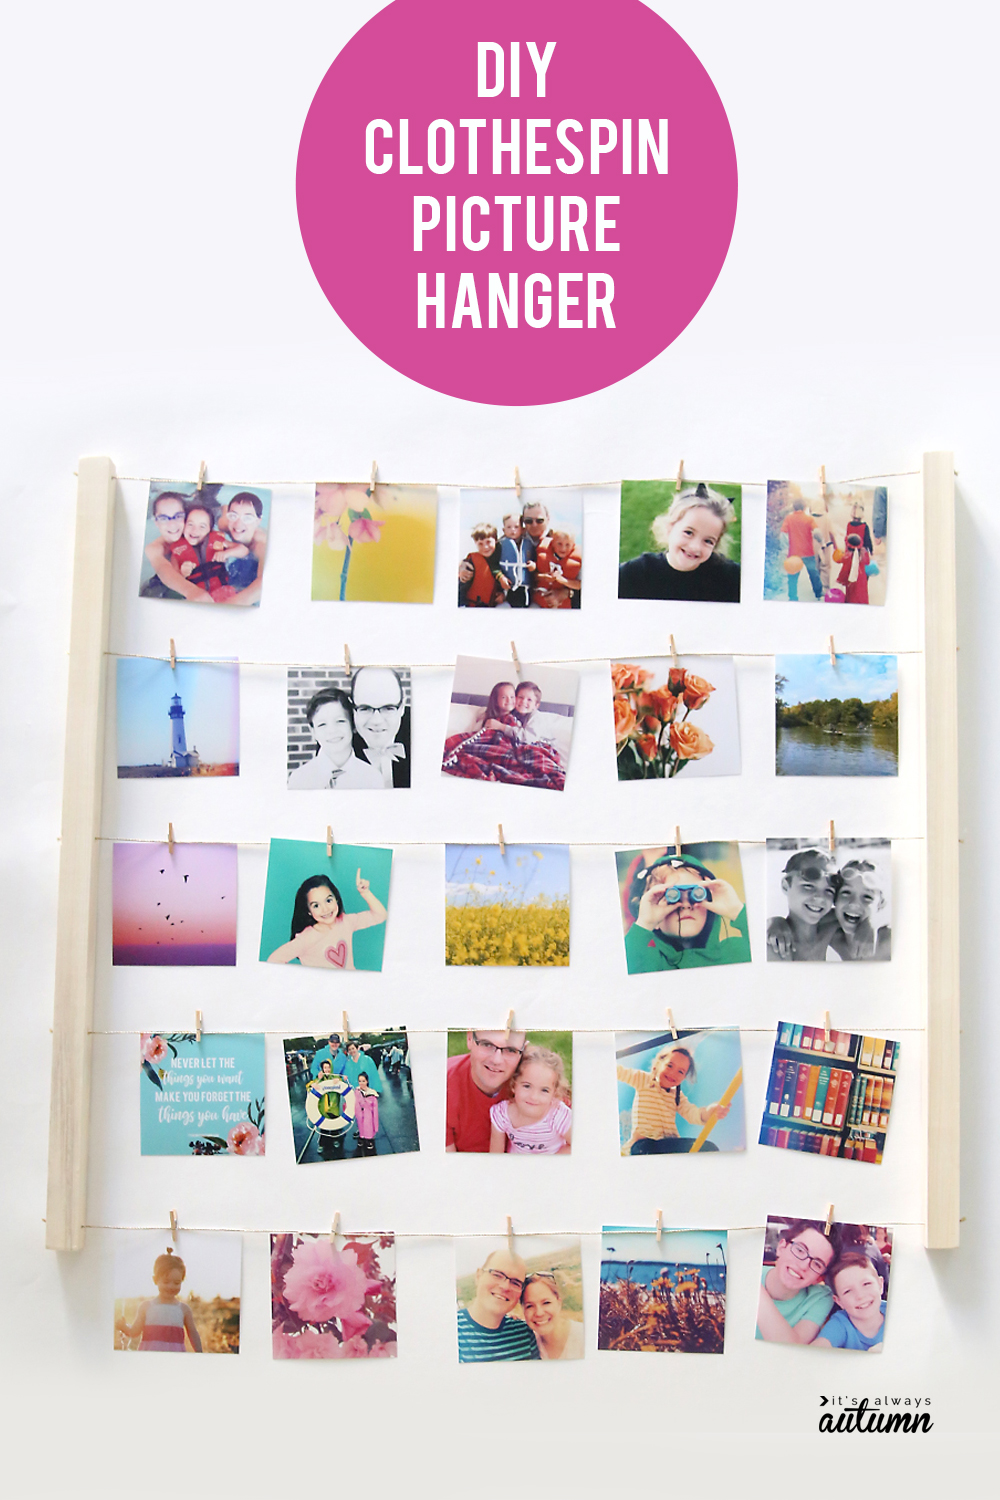 DIY clothespin picture hanger made from square dowels and twine